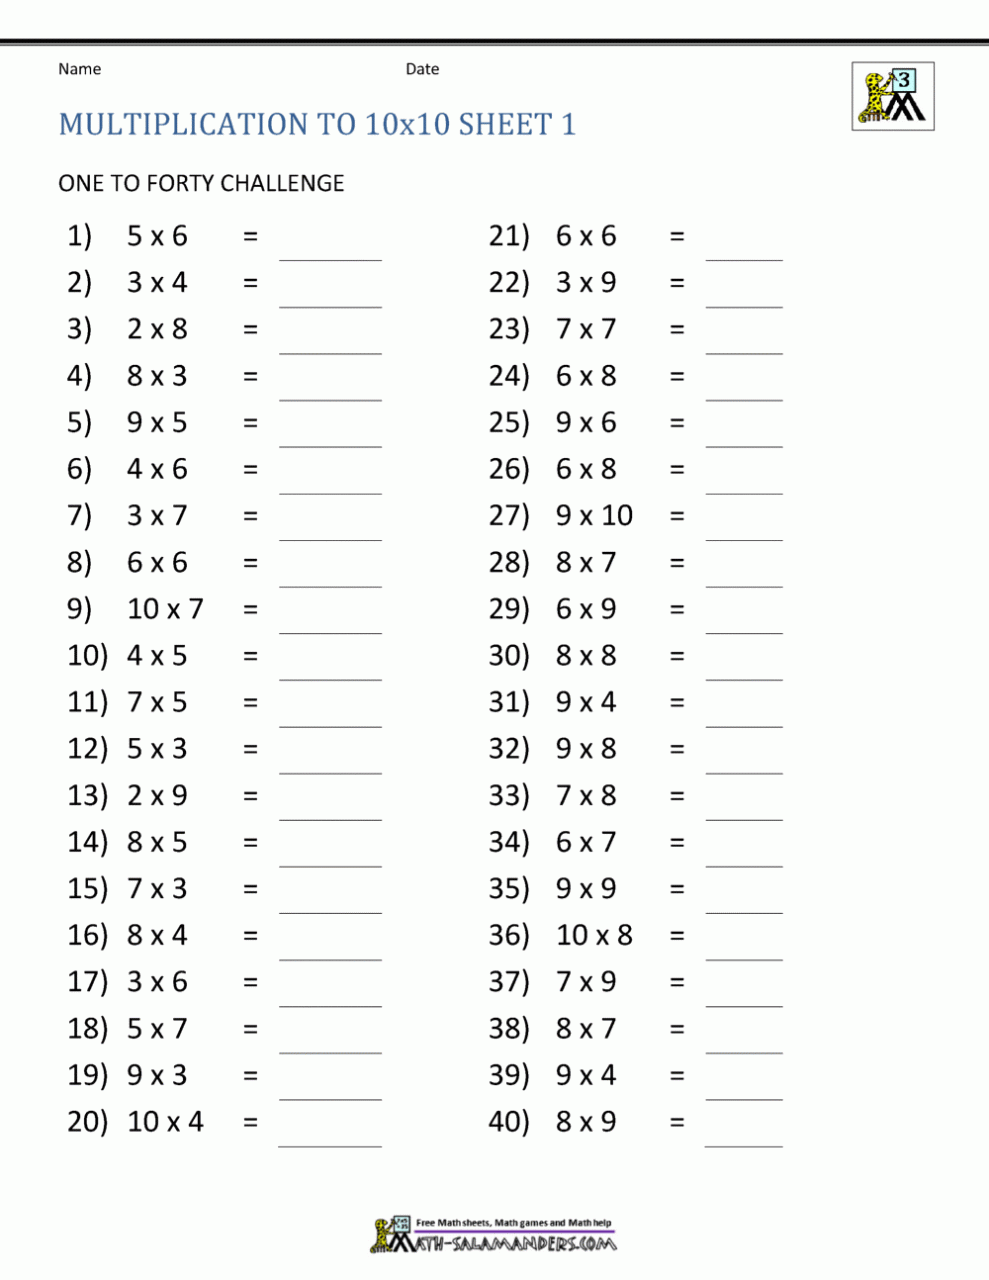 Multiplication Facts Worksheets Understanding Multiplication to 10x10